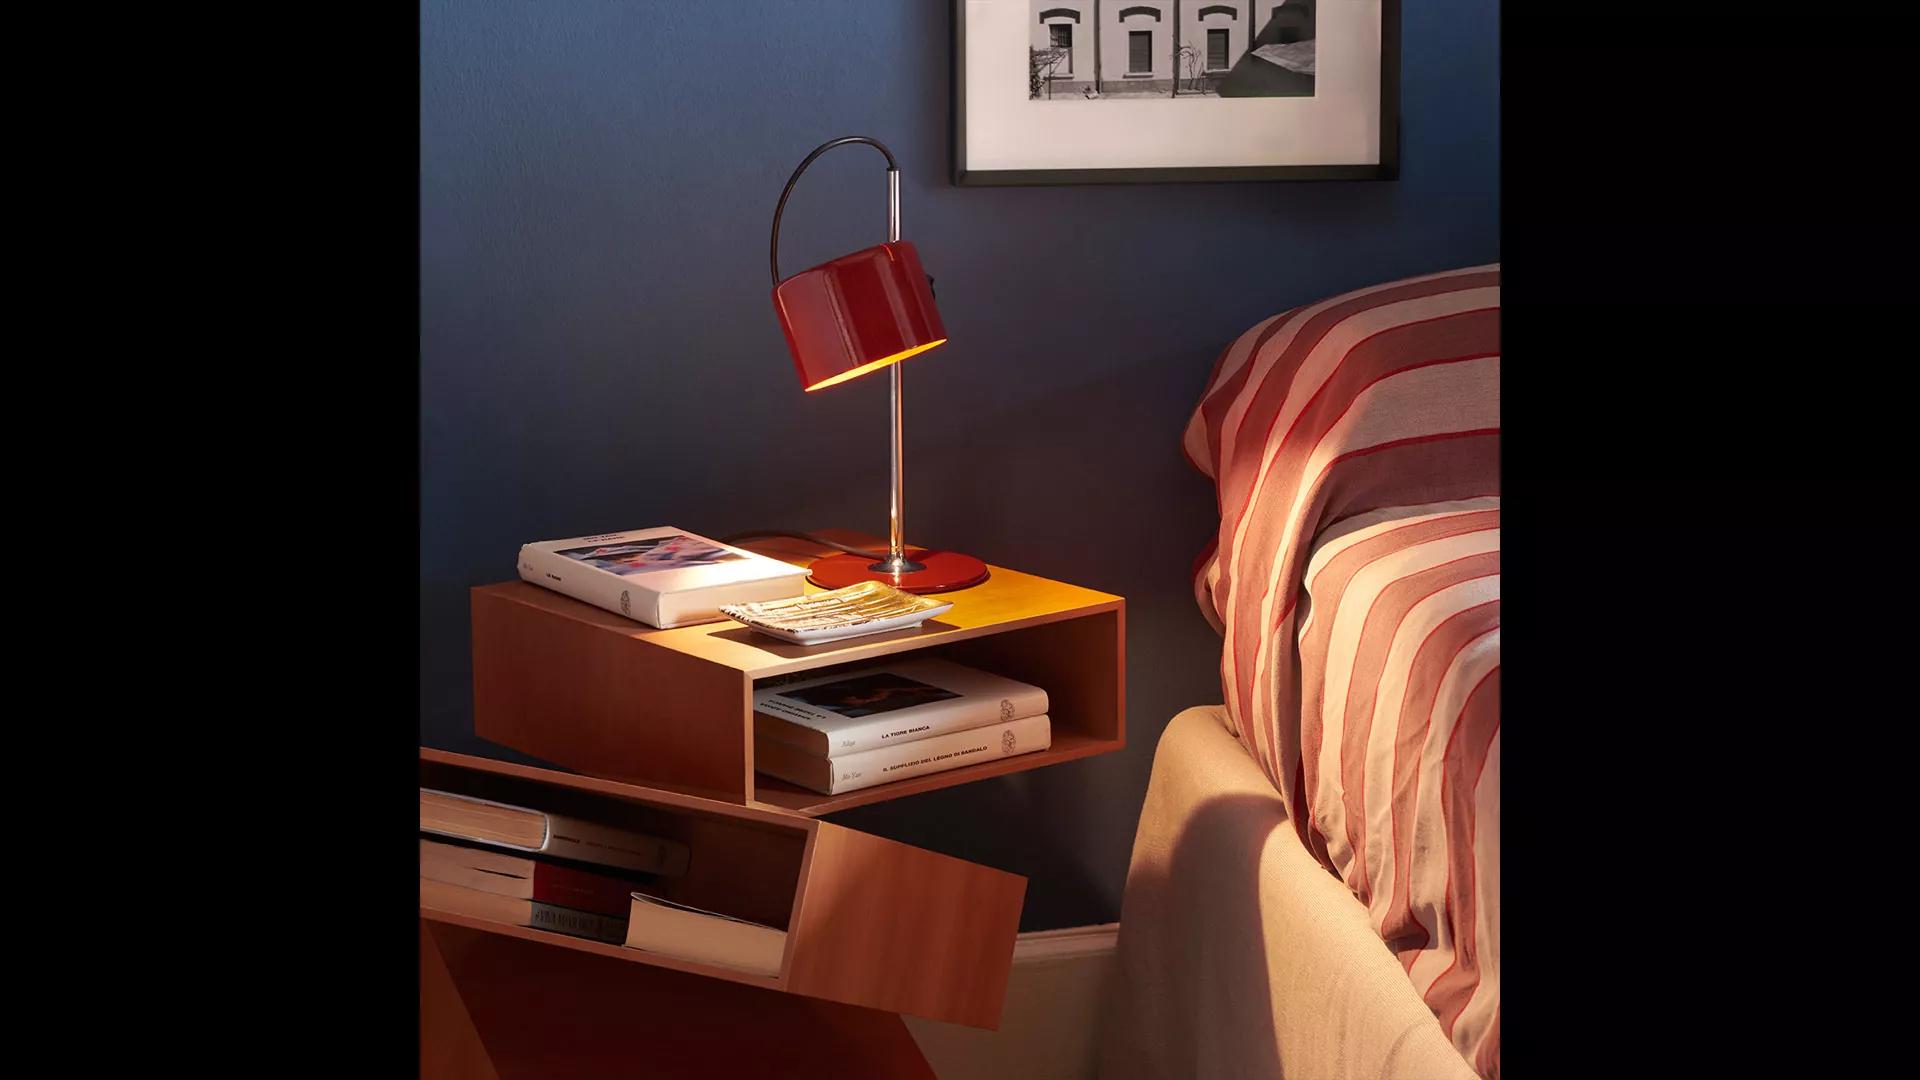 Joe Colombo model #2201 'Mini Coupé' table lamp in scarlet red for Oluce. 

Executed in red enameled metal and chrome, this table lamp is a smaller-scale version of one of the most refined minimalist Italian designs of the mid-century and an icon